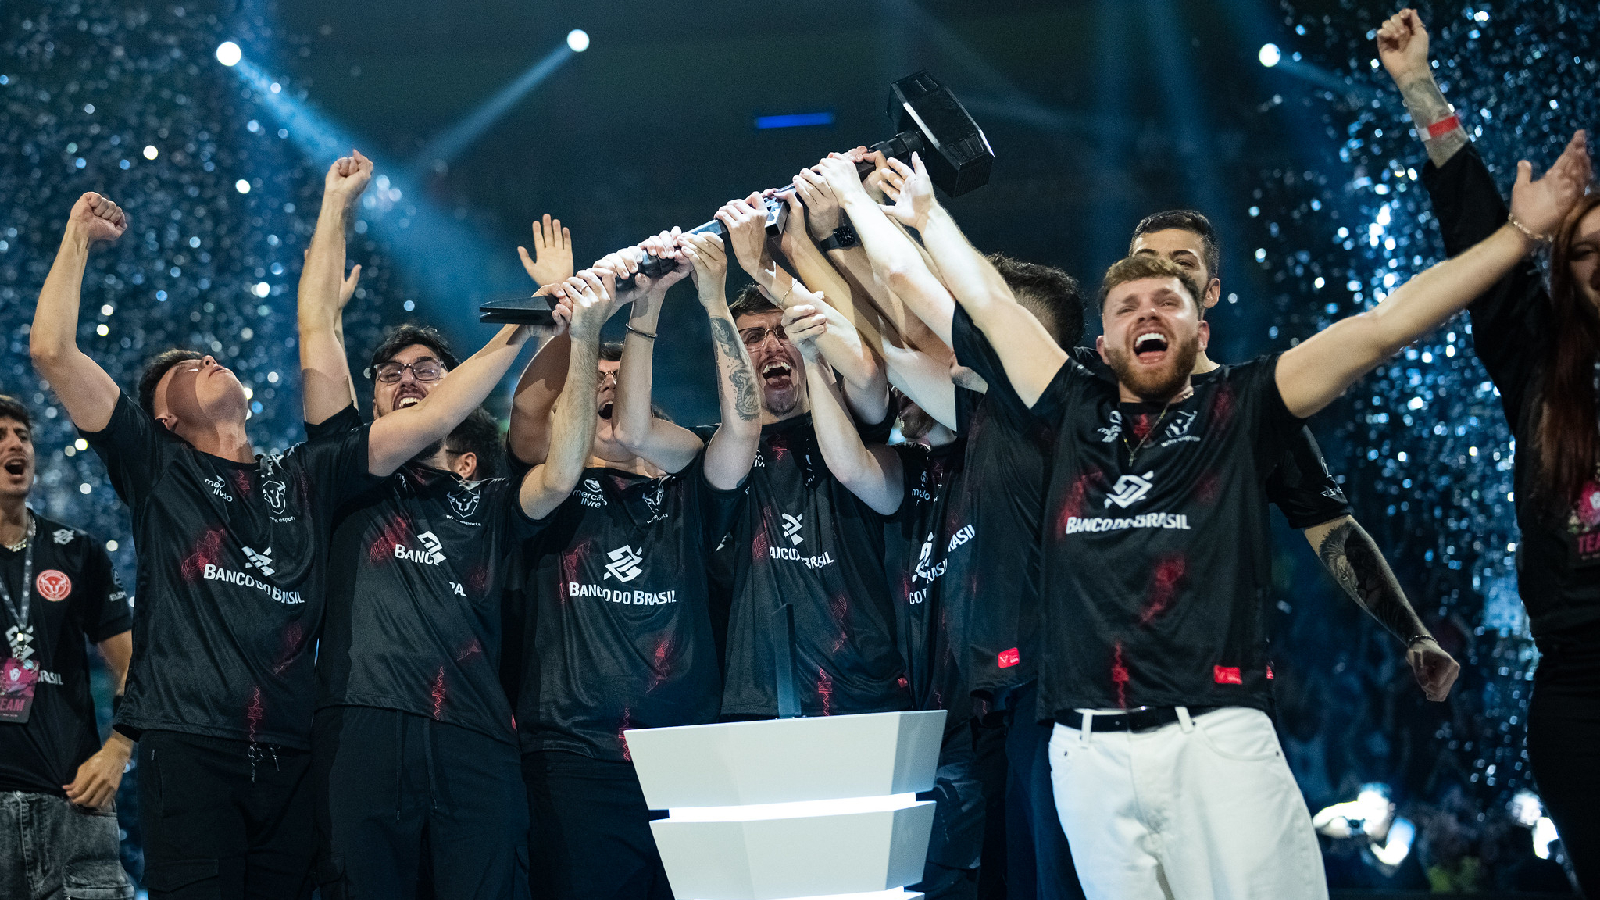 w7m esports wins Rainbow Six Invitational 2024 Final placements and